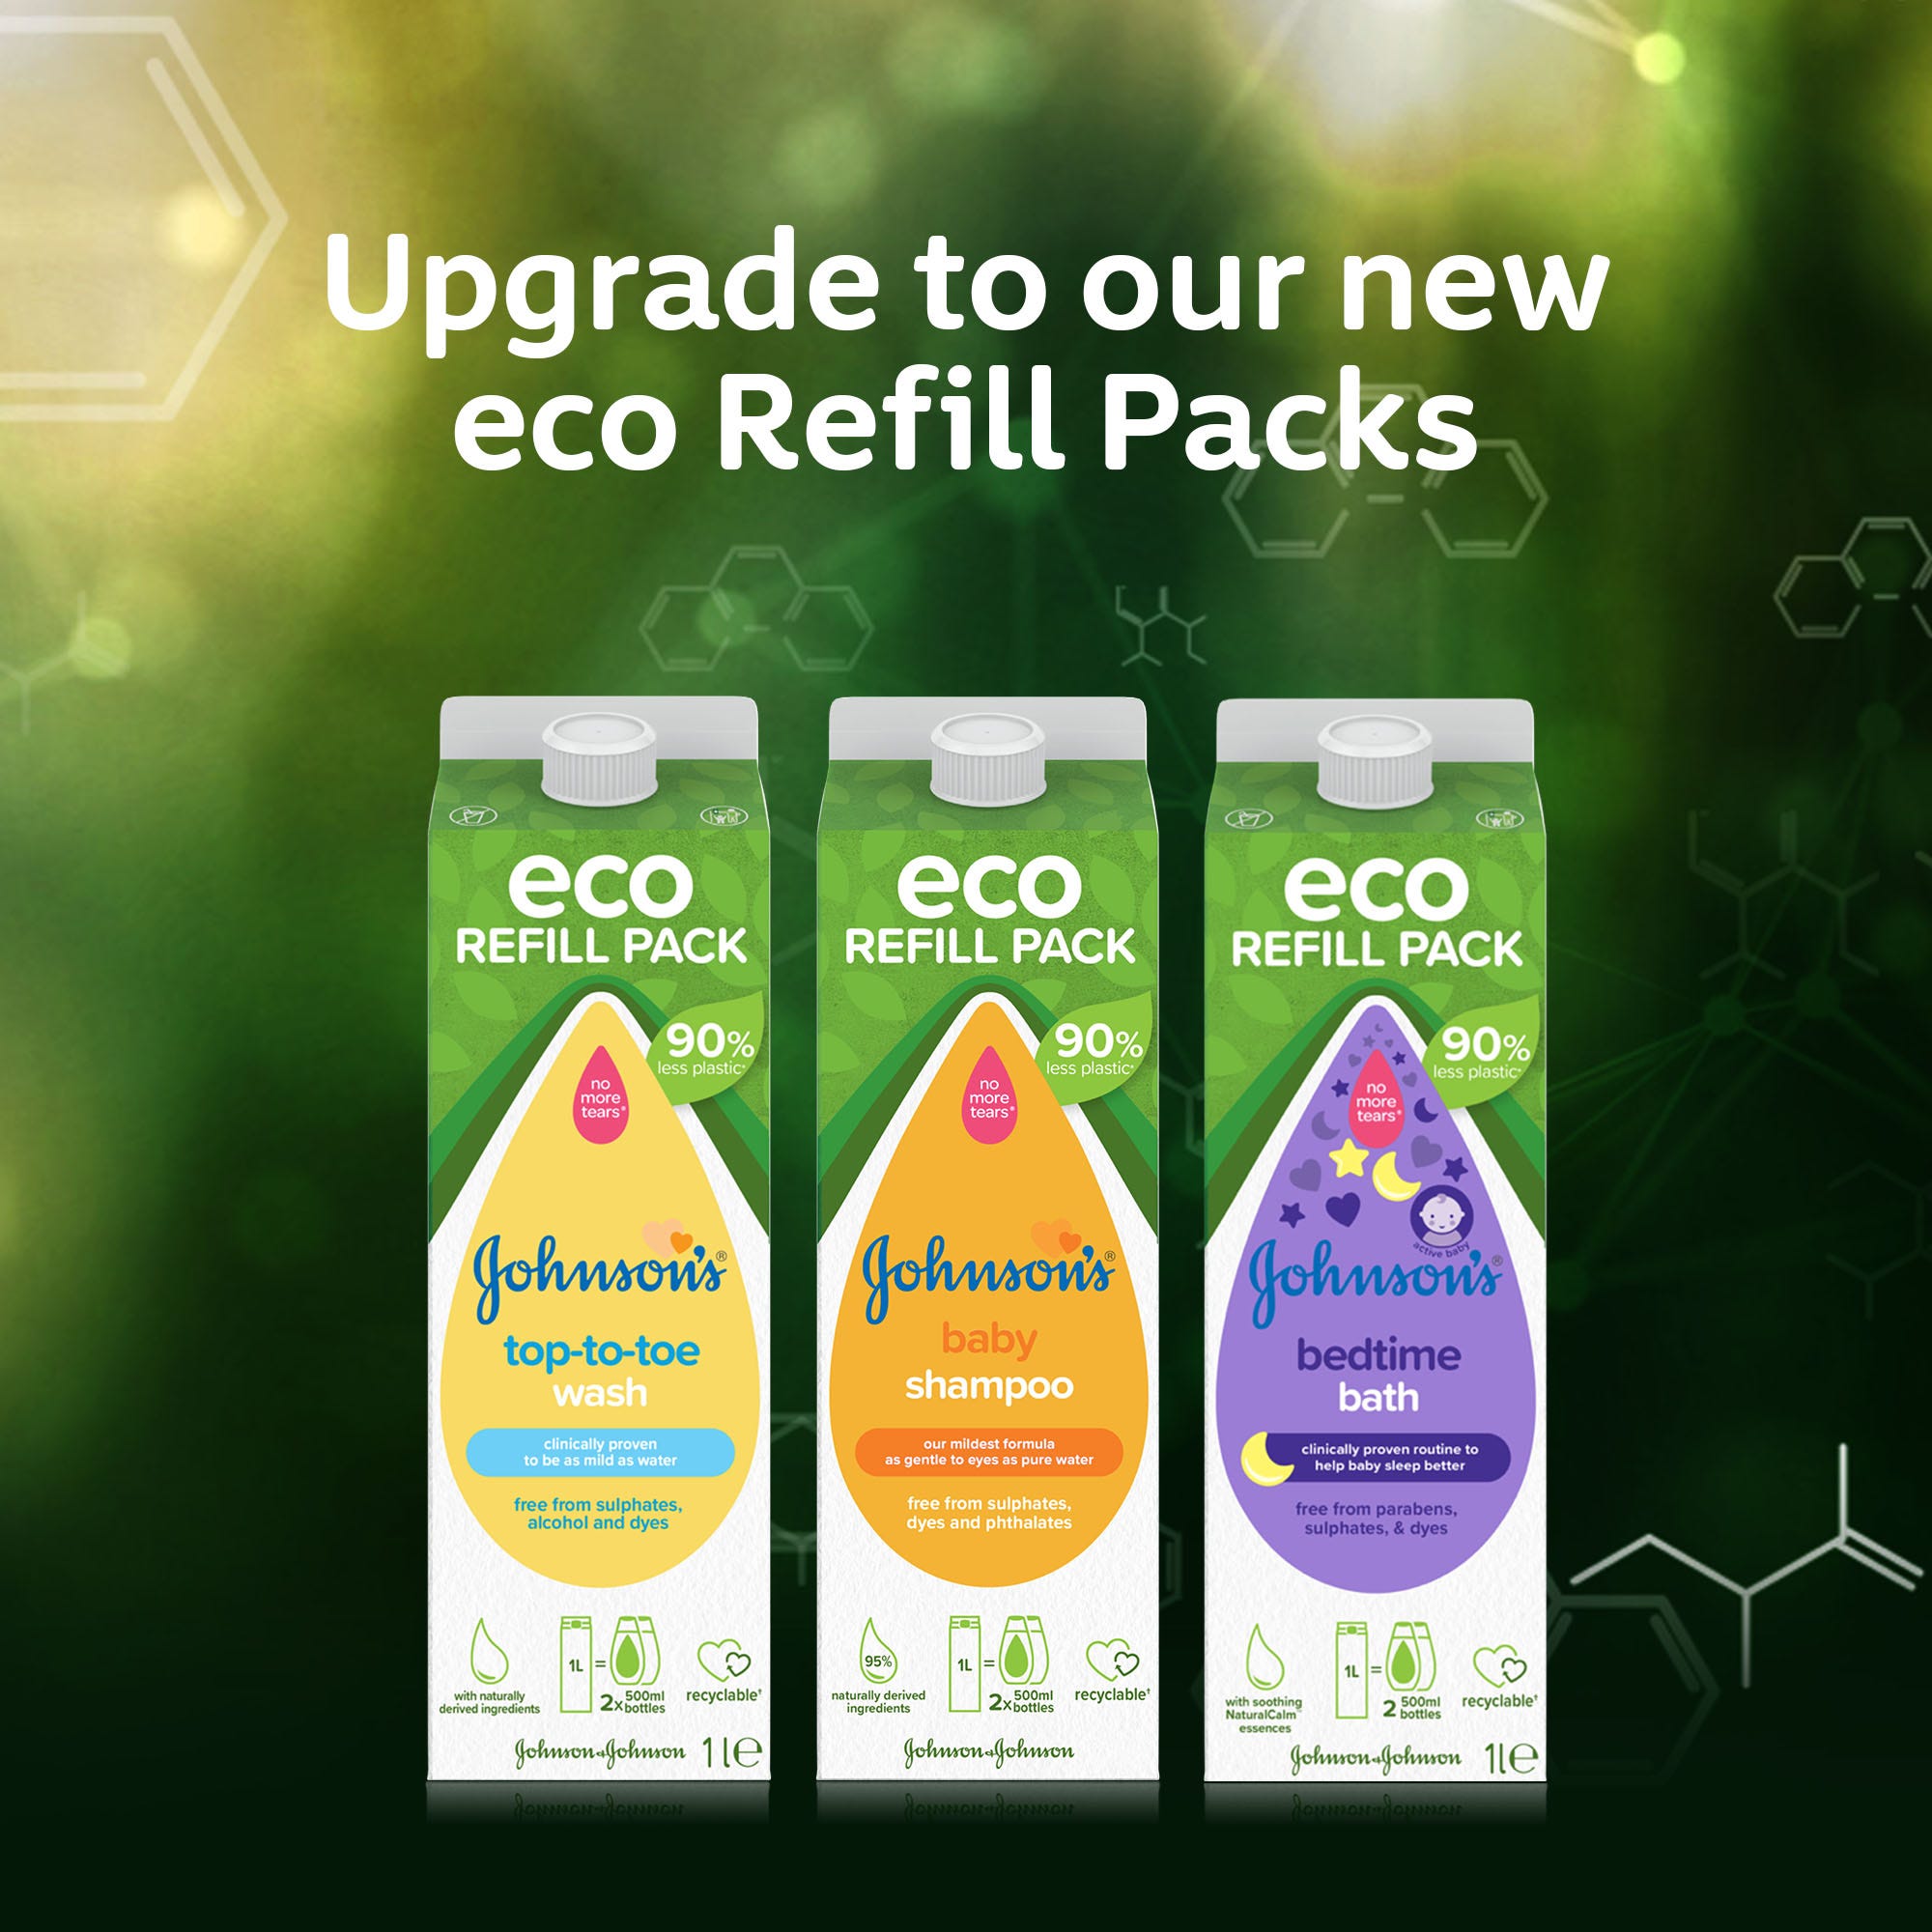 Advert that says Upgrade to our new eco refill packs.